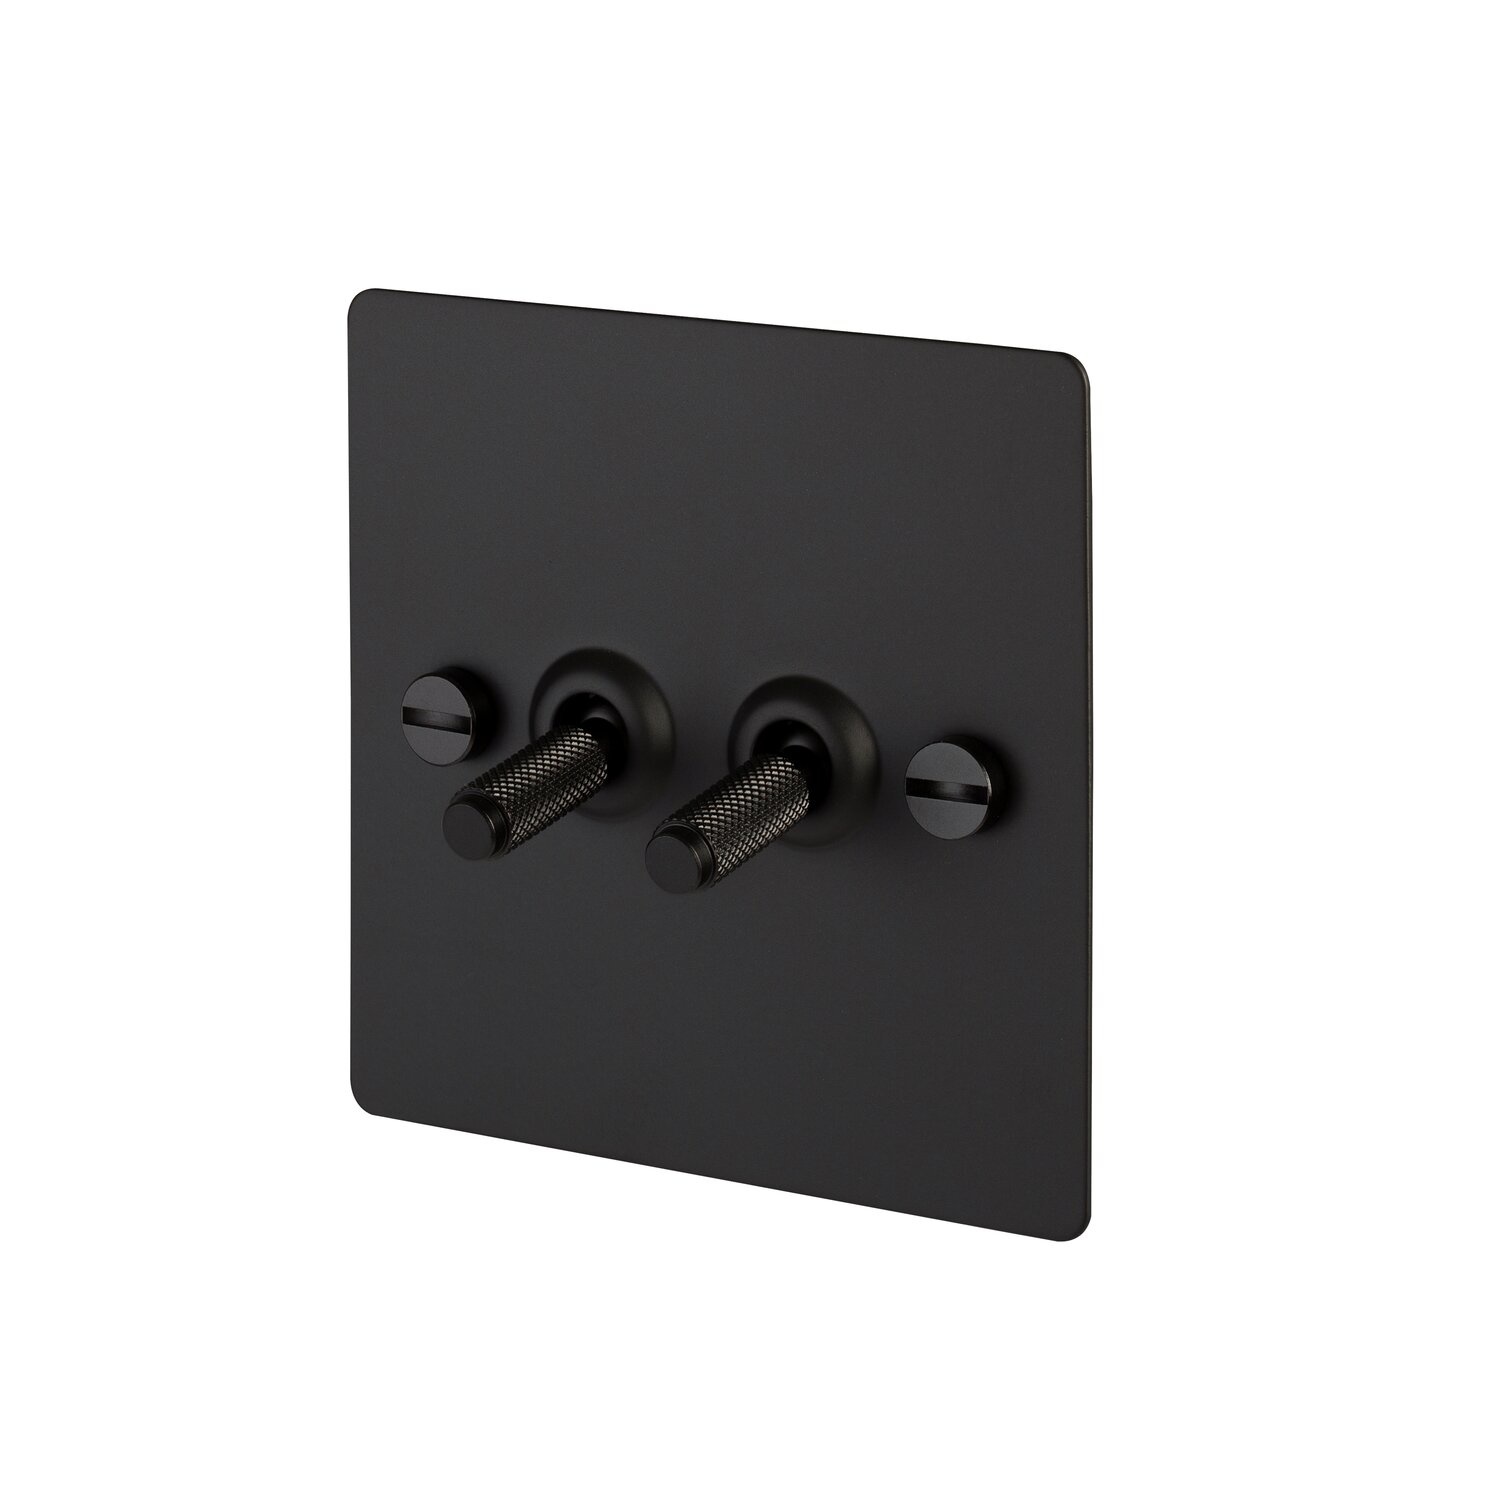 You can buy light switches from Buster + Punch at Deurklinkenshop